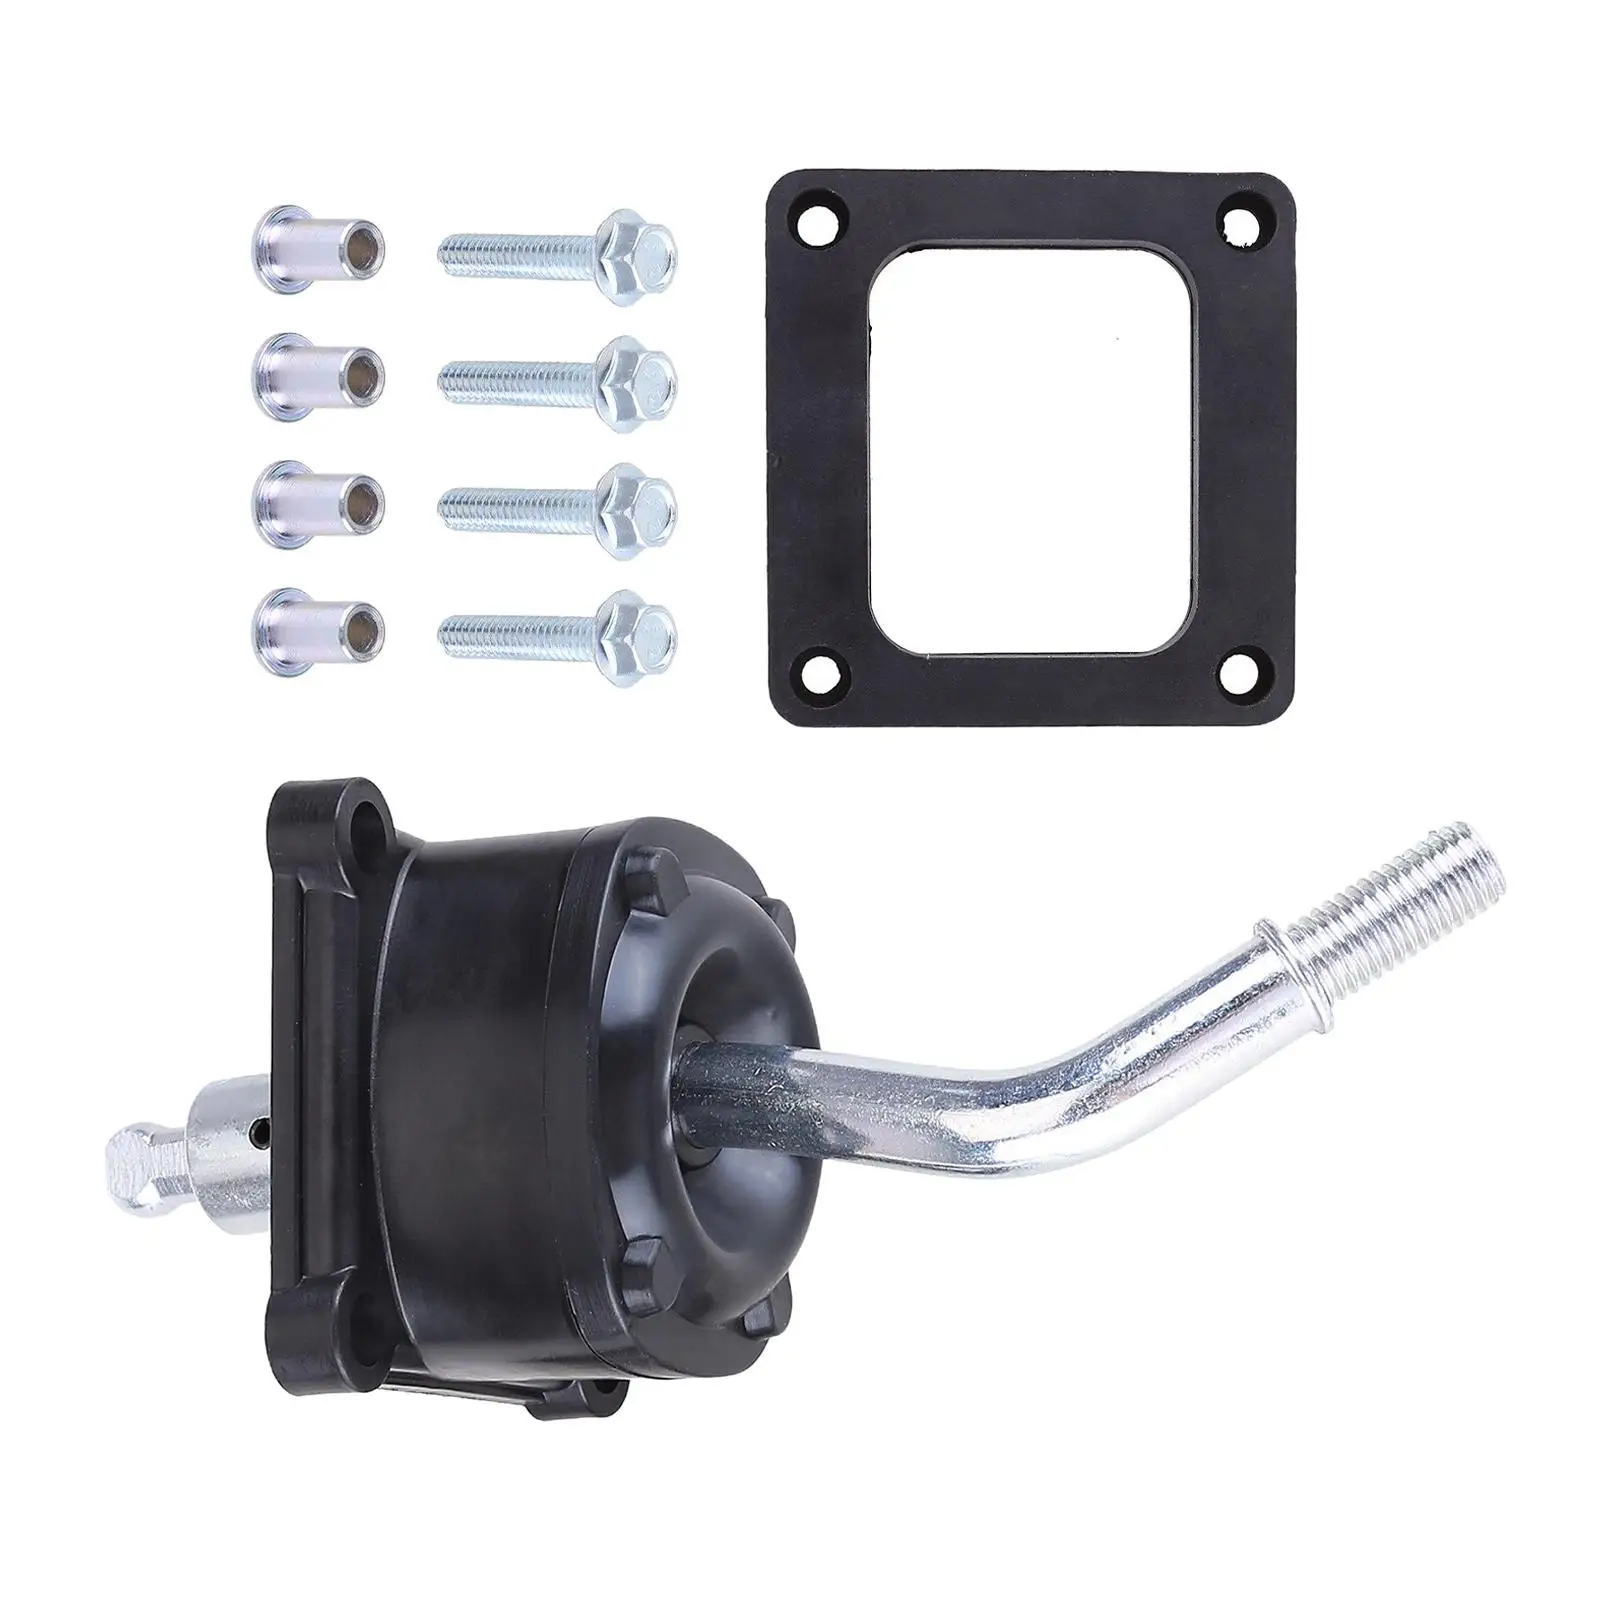 Shift Tower Assembly Kit Nv25982 Professional Accessory Good Performance Sturdy Replacement Parts